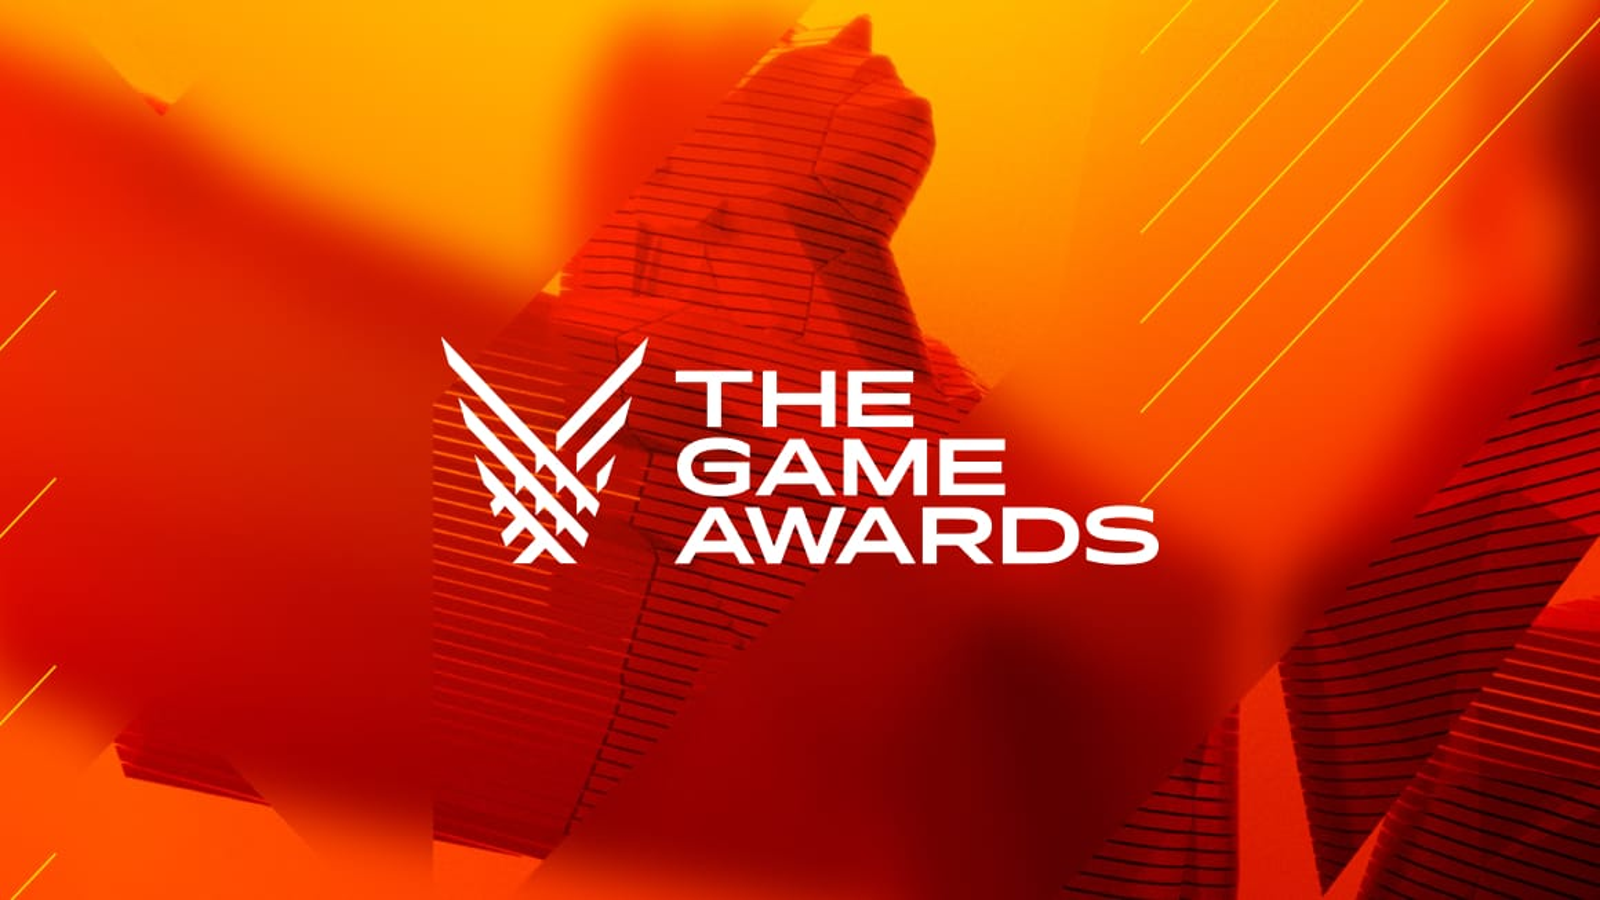 2022 Game Awards breaks records with over 100 million livestreams